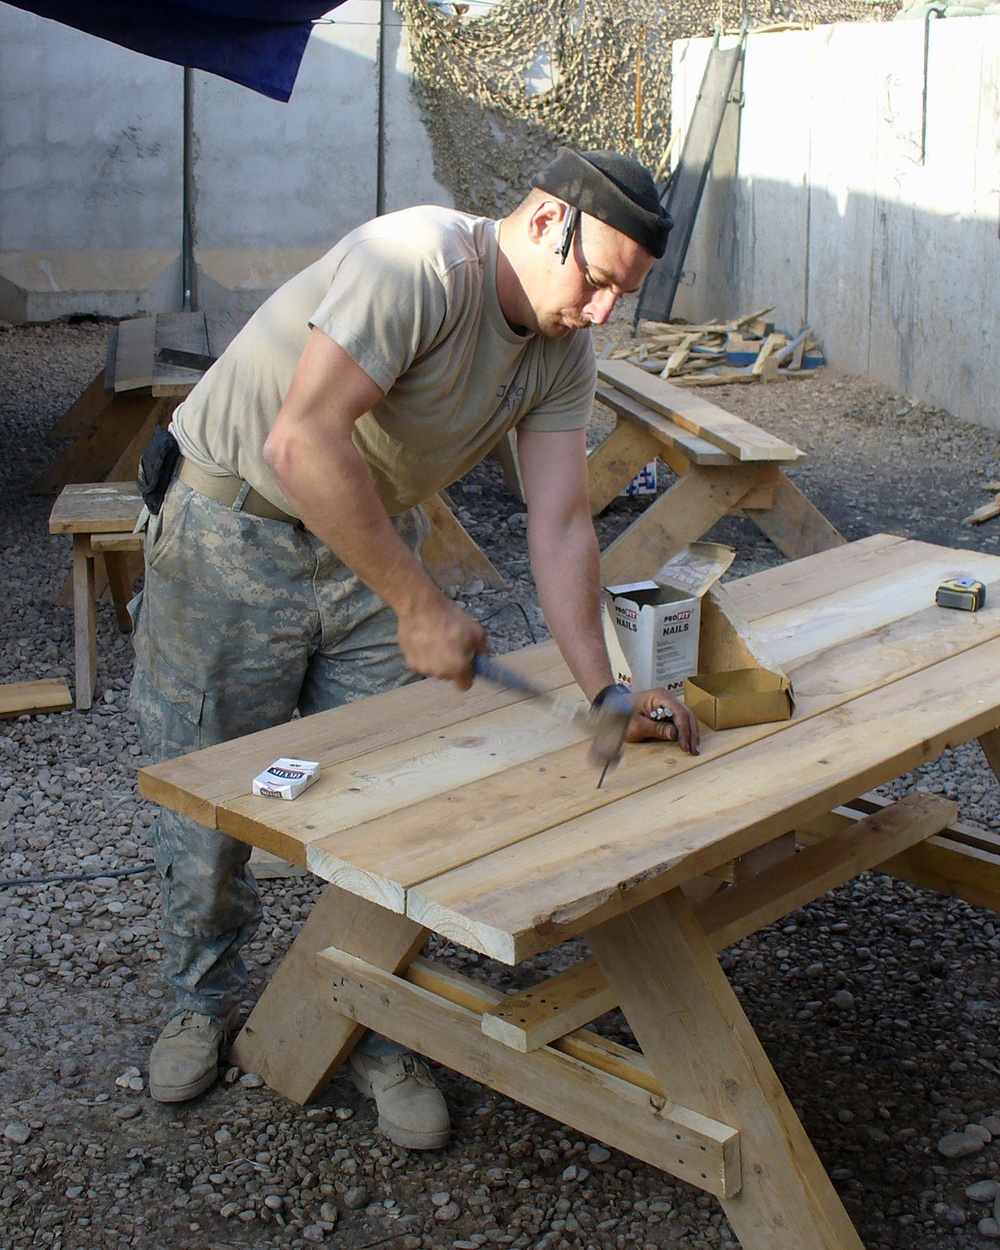 Soldier transforms patrol base into more livable, operational place